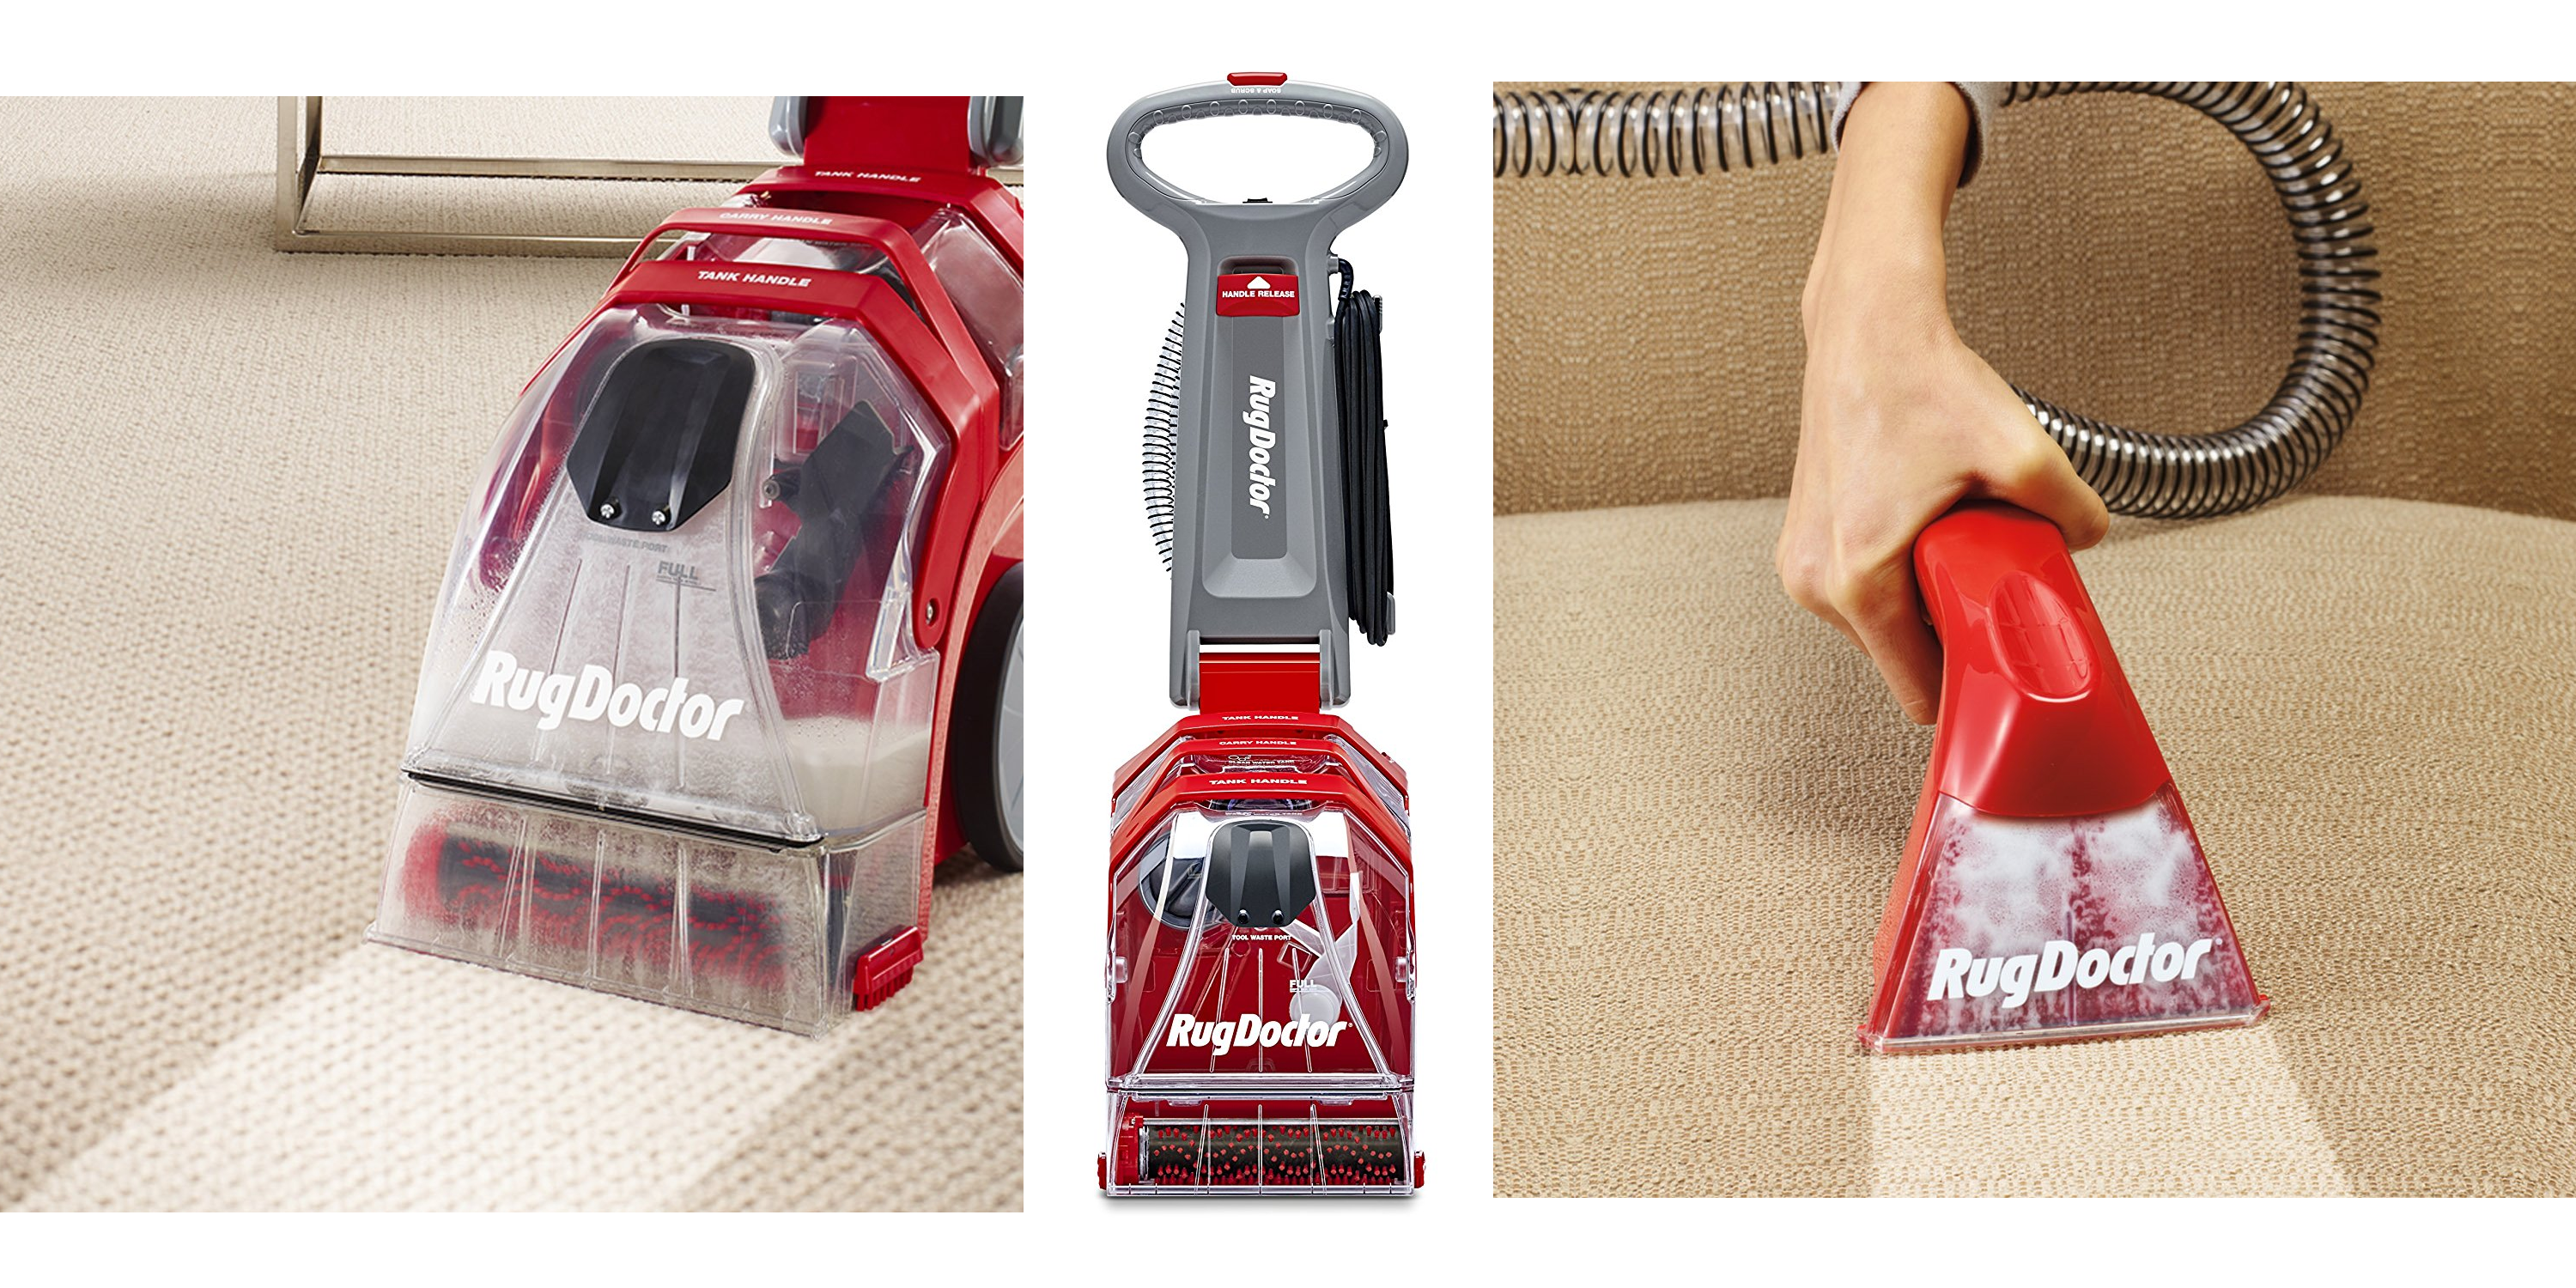 Rug Doctor Deep Carpet Cleaner Down to $199.98!